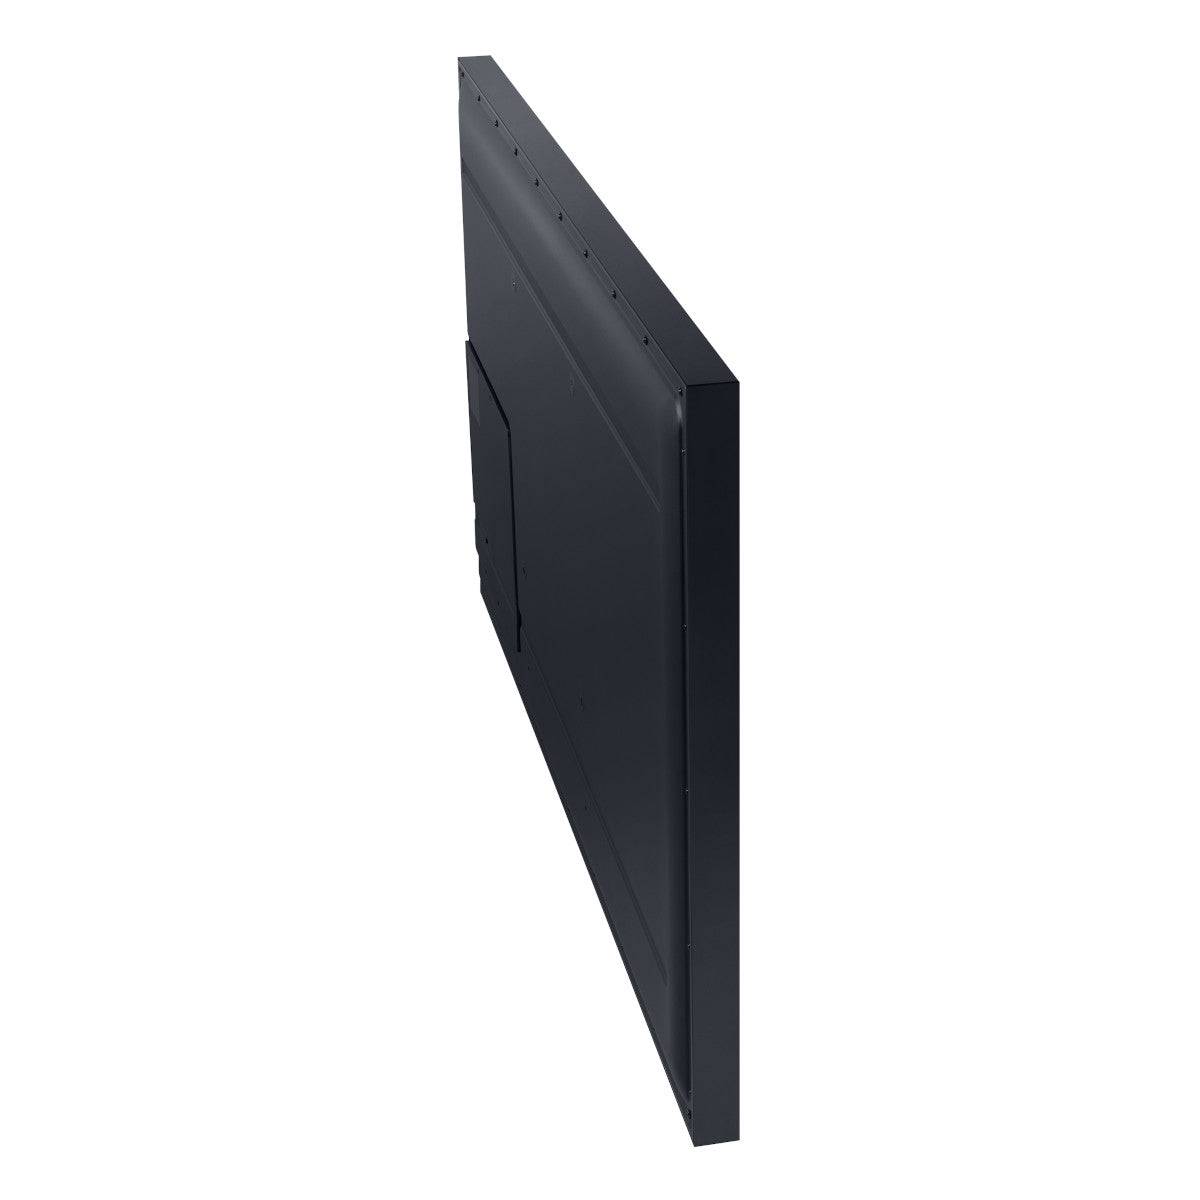 Samsung QN55LST7TA 55" The Terrace QLED 4K UHD Outdoor Smart TV with HW-S800B Ultra Slim Wireless 3.1.2Ch Soundbar System with Dolby Atmos (Black)